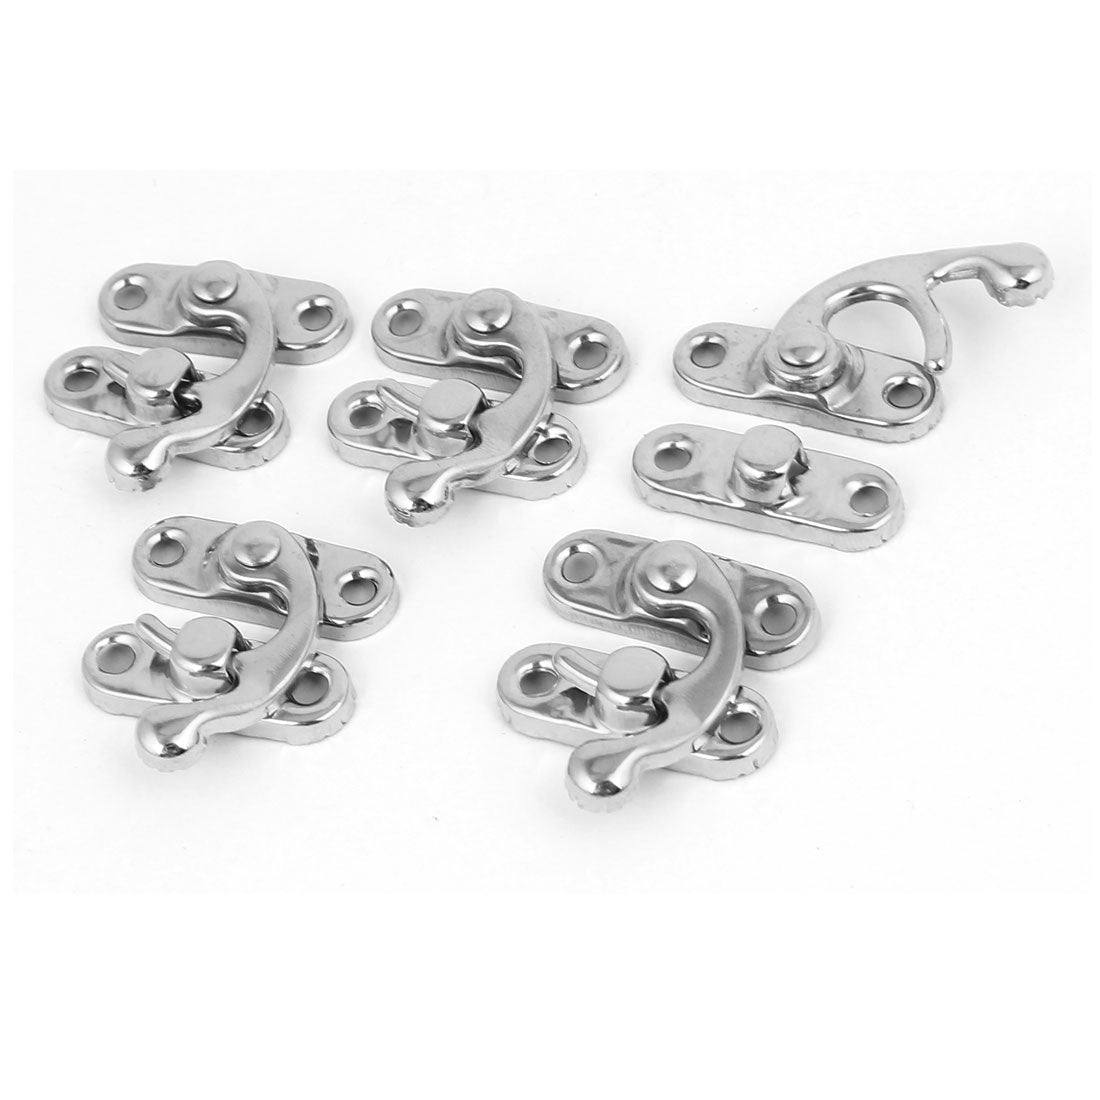 uxcell Uxcell Wine Box Chest Hook Latch Buckle Catch Toggle Hasp Silver Tone 5pcs